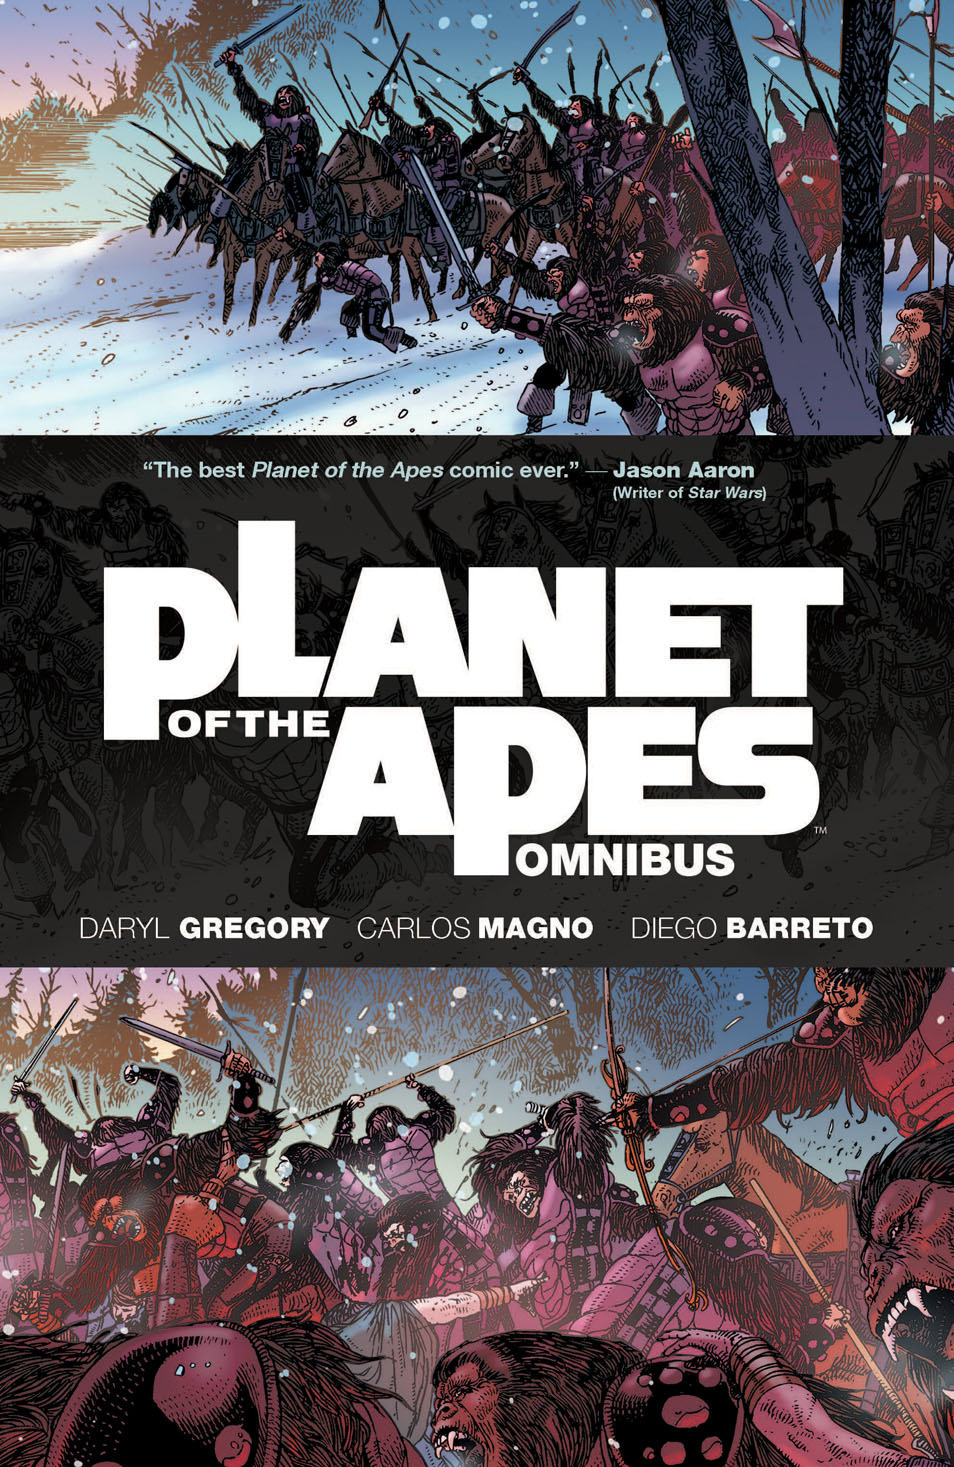 This image is the cover for the book Planet of the Apes Omnibus, Planet of the Apes